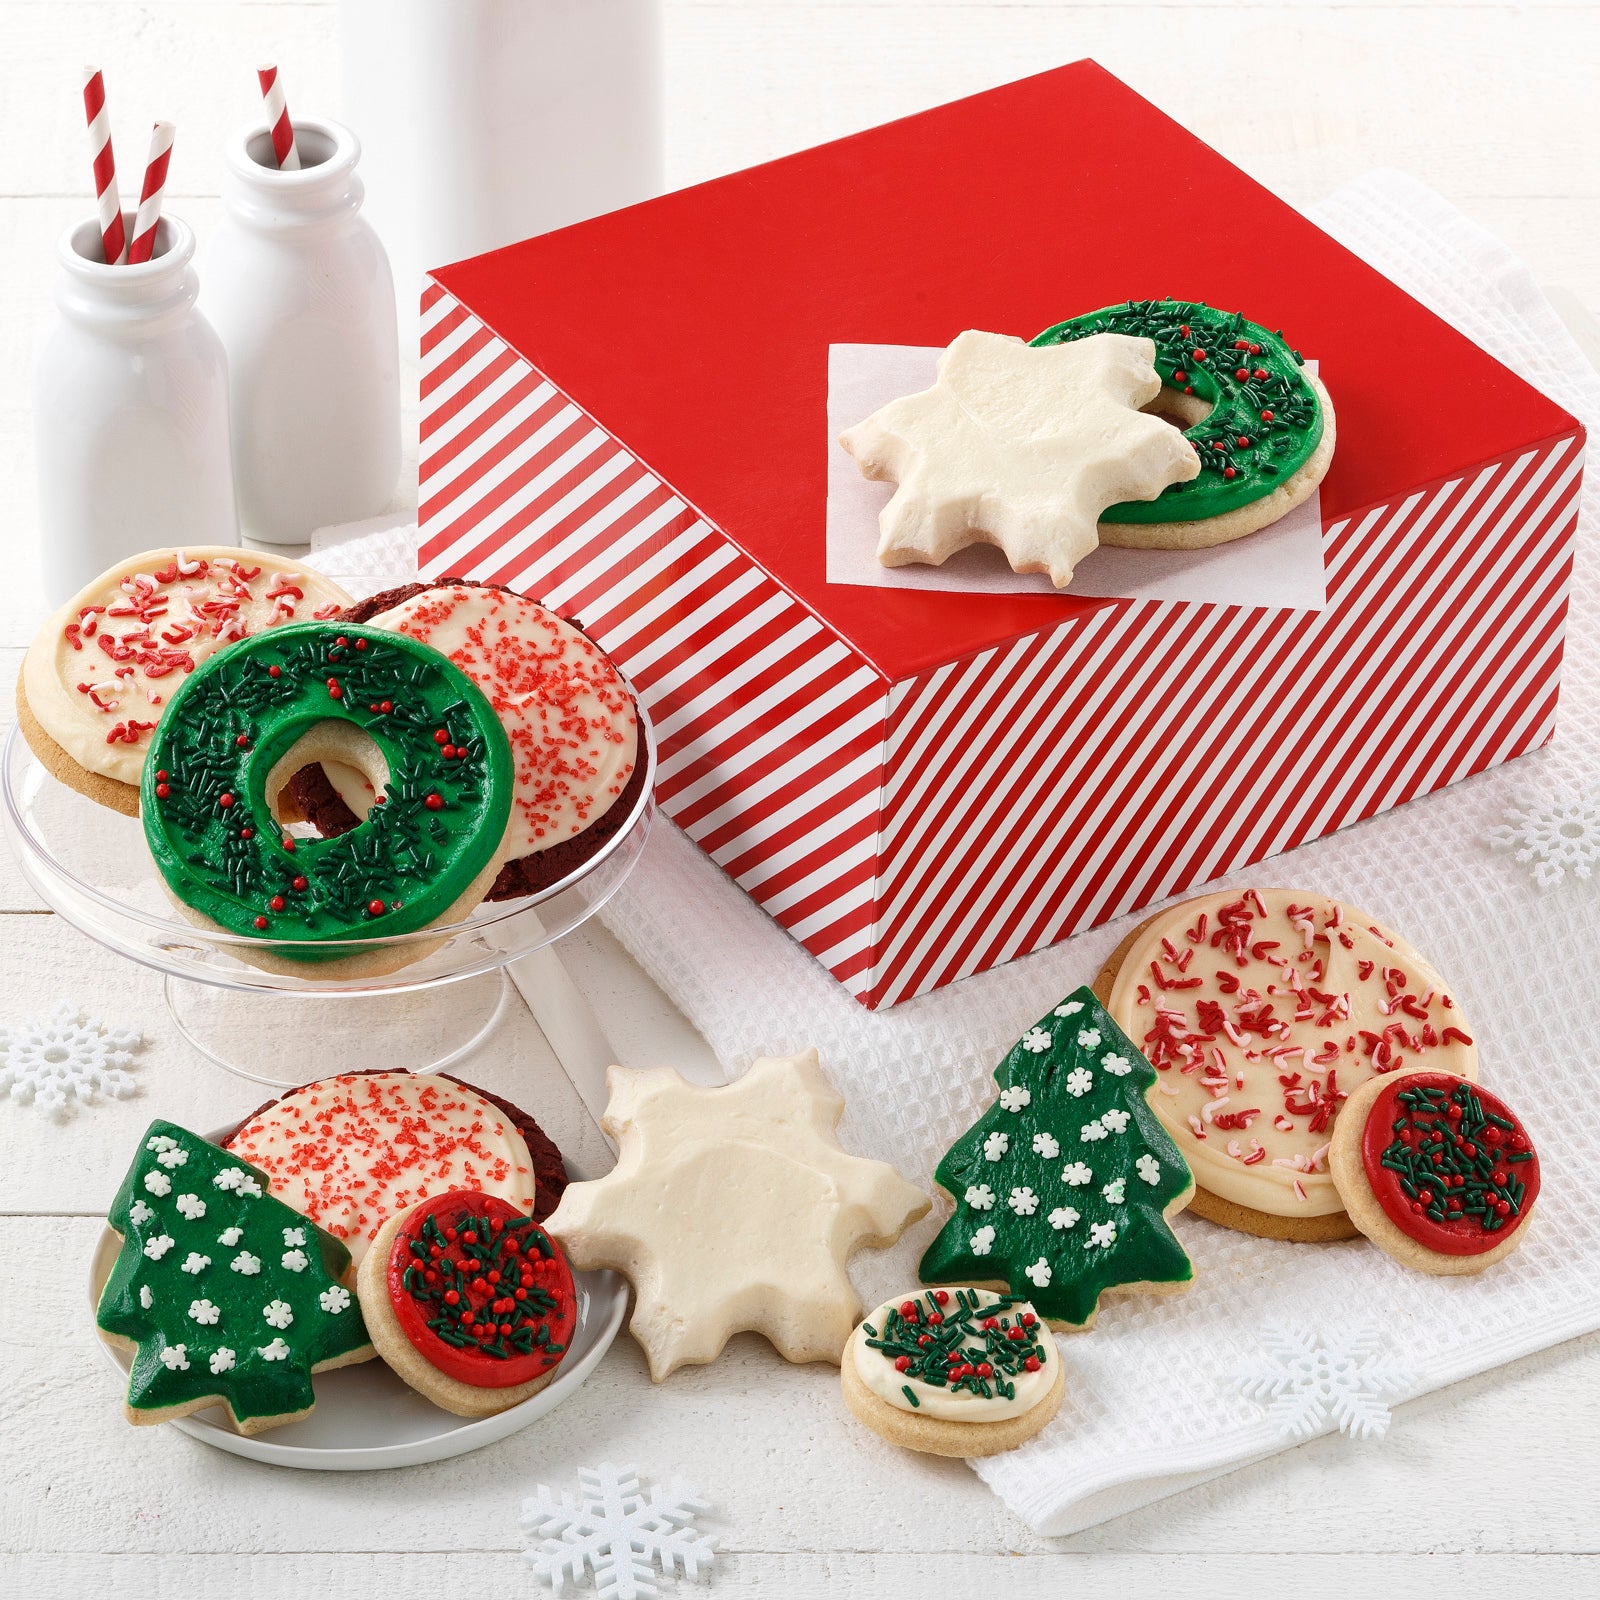 Red and white striped gift box surrounded by an assortment of holiday themed frosted cookies